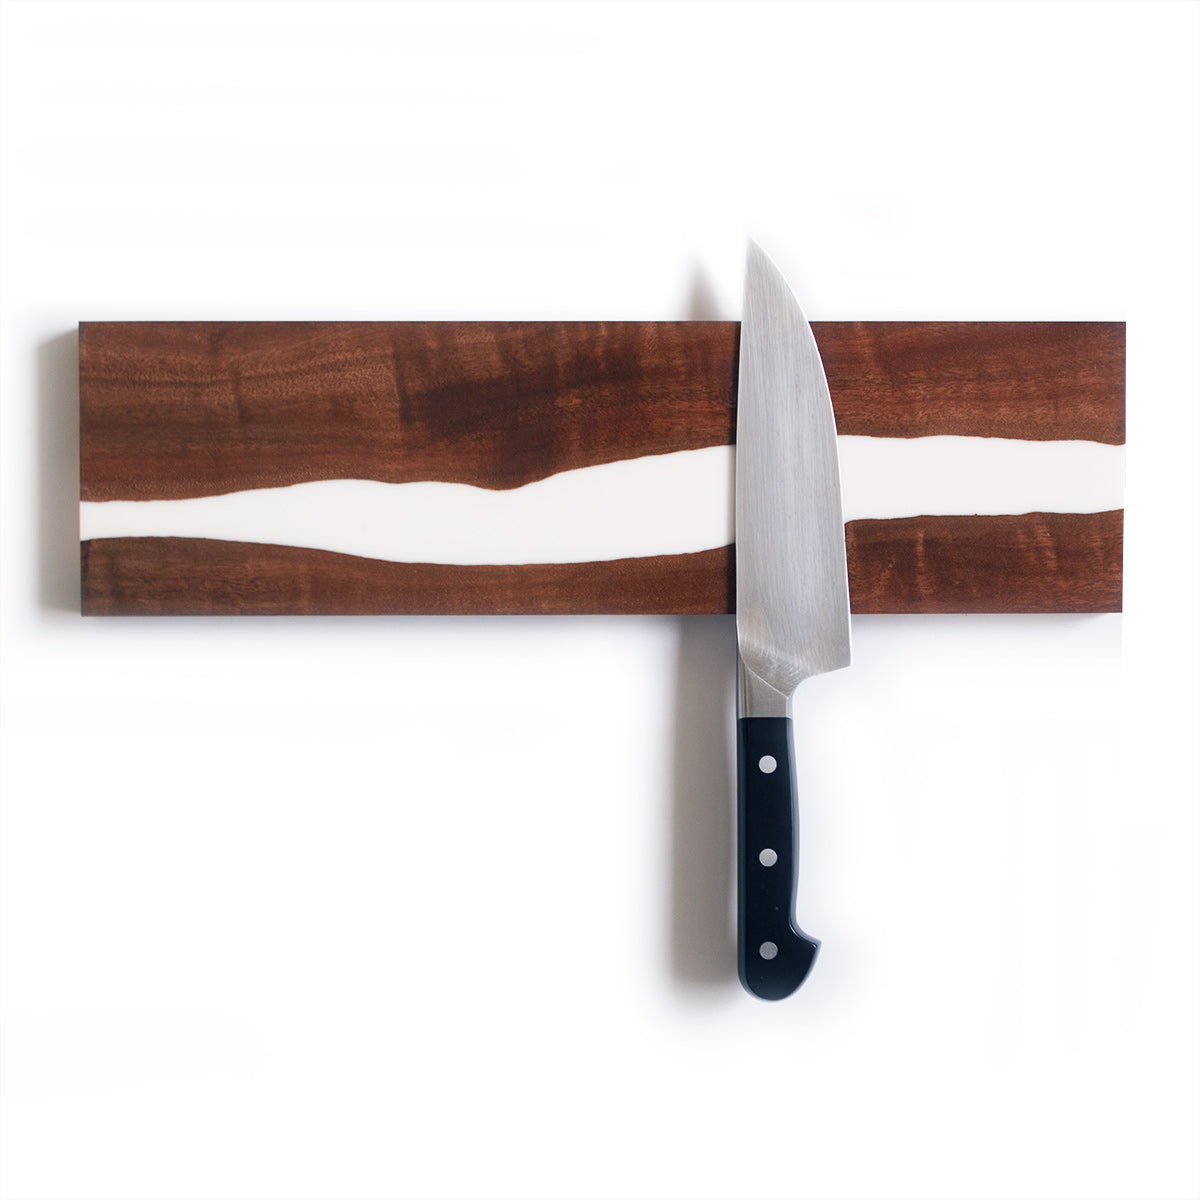 magnetic knife holder made with salvaged live edge hardwood and white epoxy resin